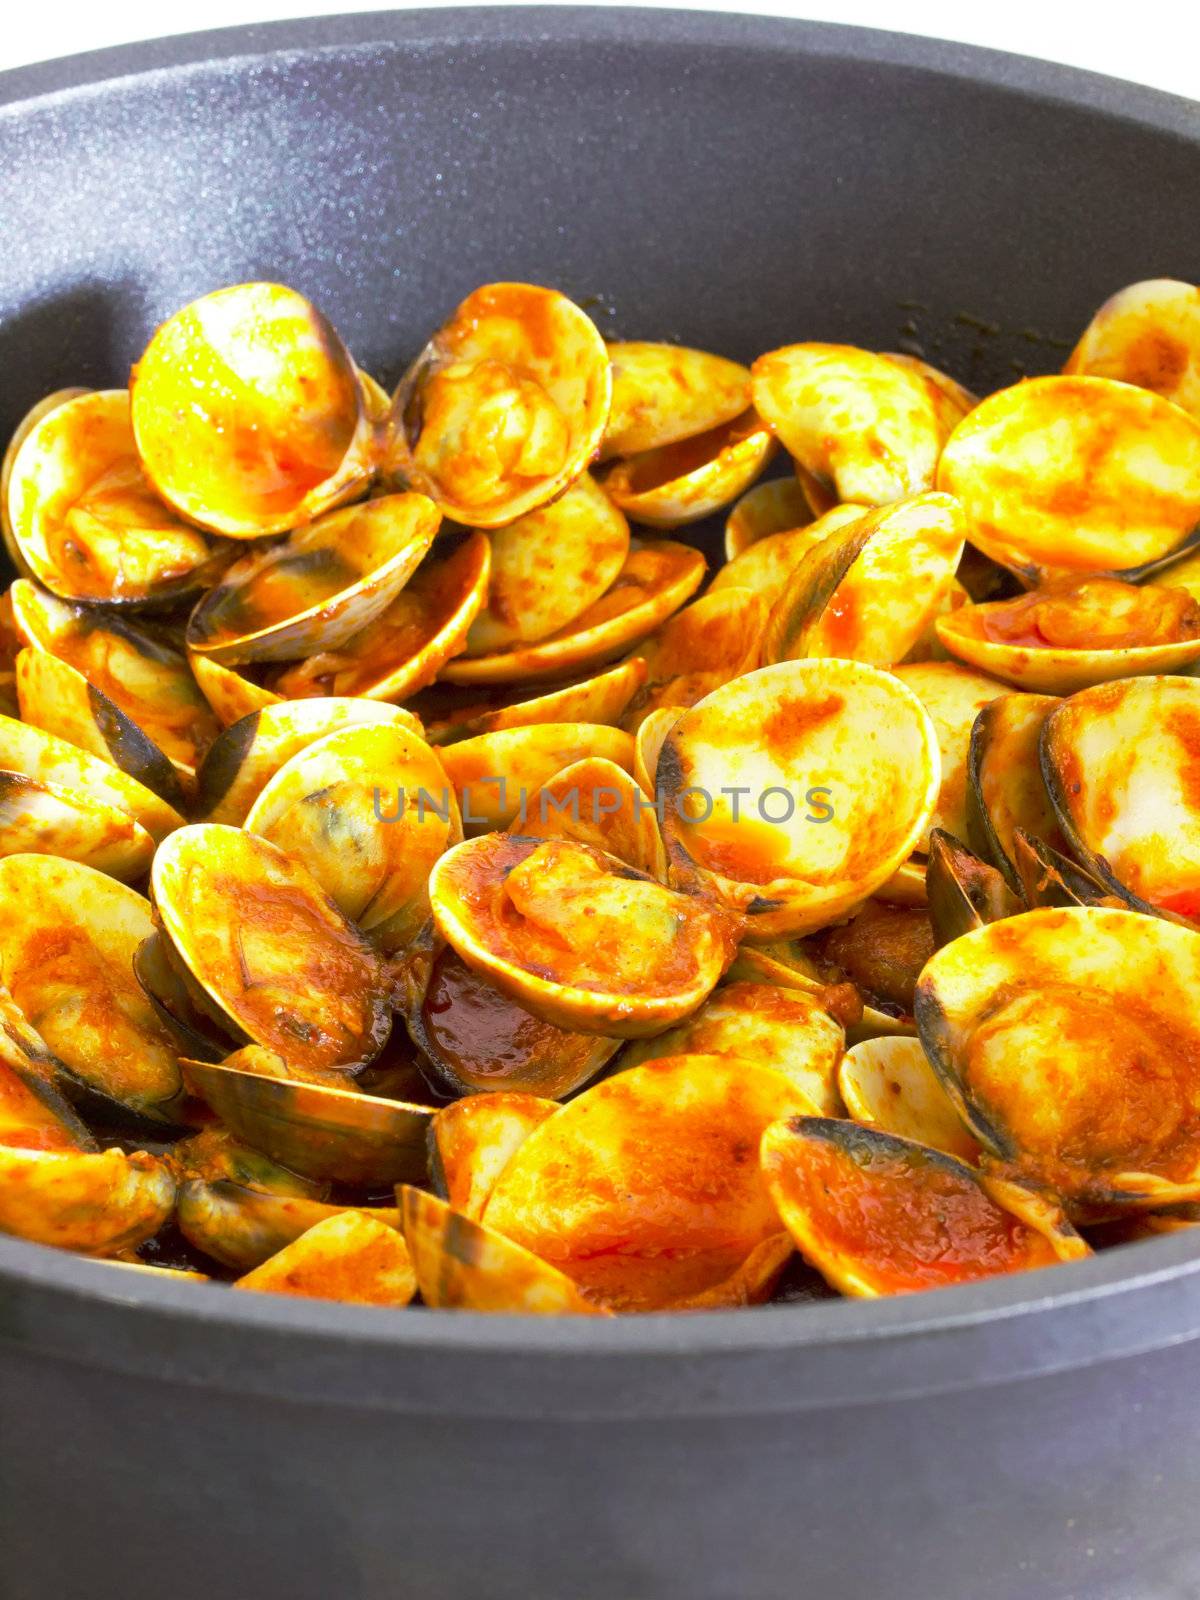 close up of clams in chili sauce